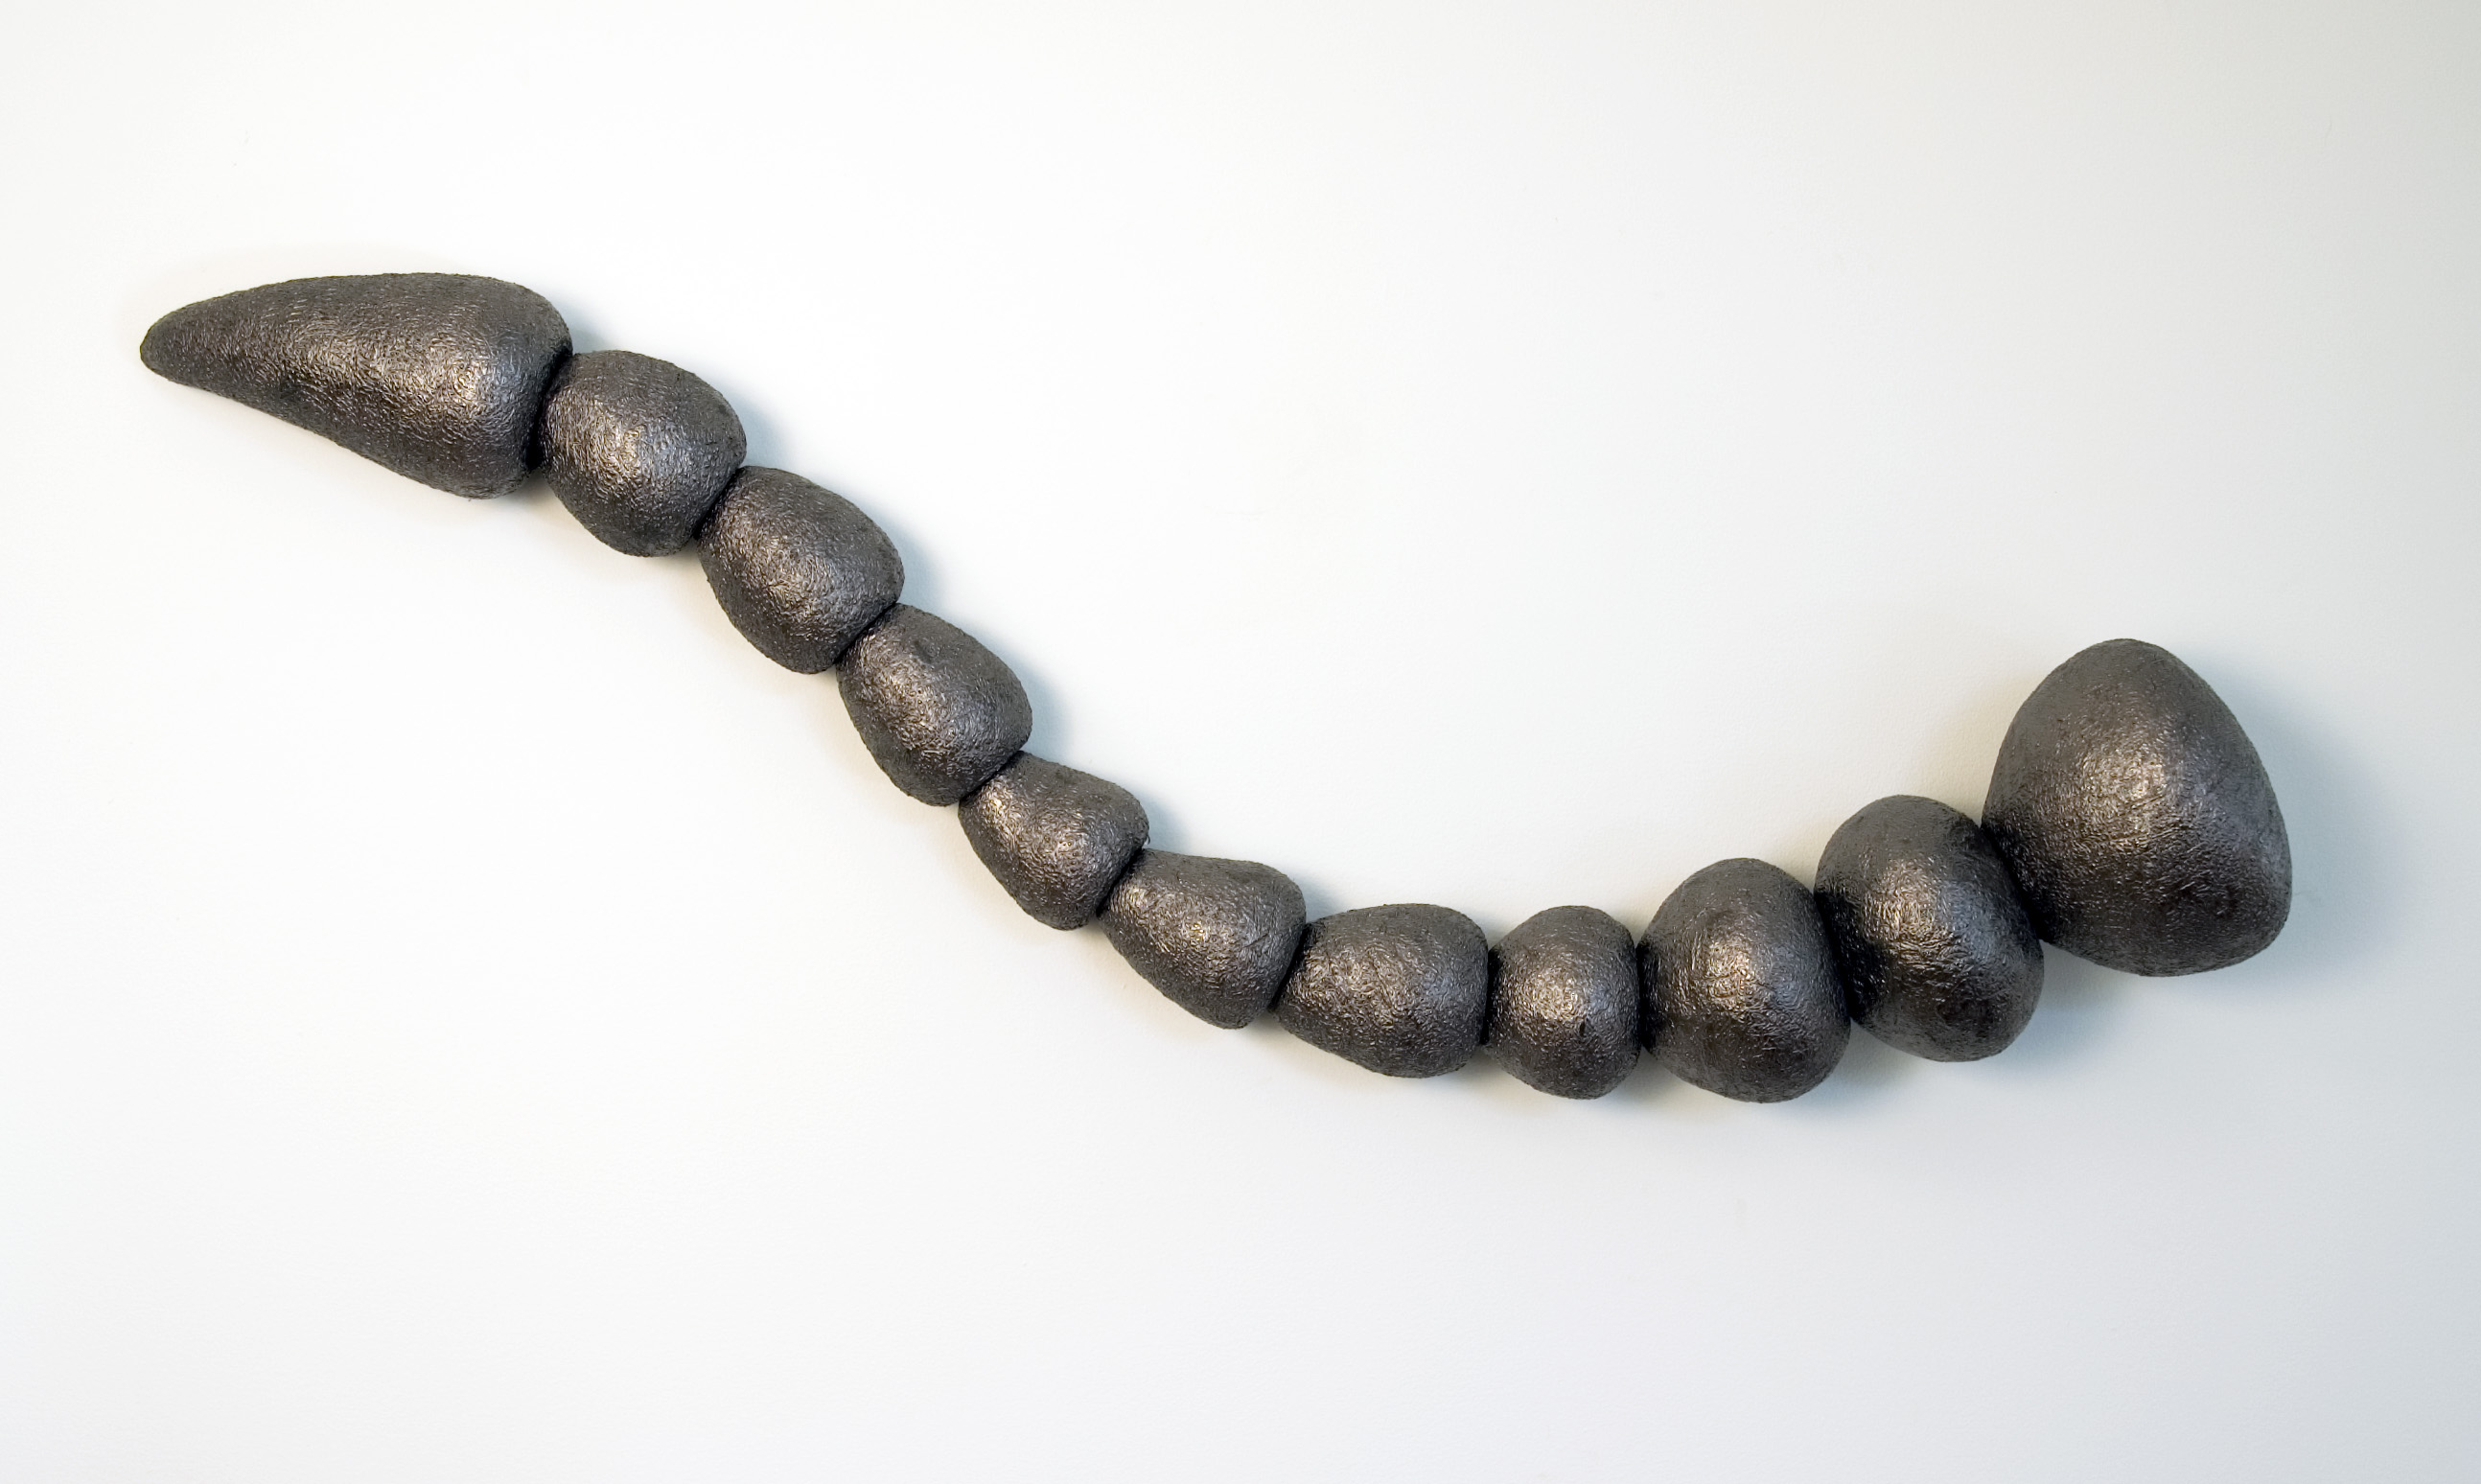 Ana England's Sense, large beads of ceramic connected together forming a tail like structure that comes to a rounded point on the left end